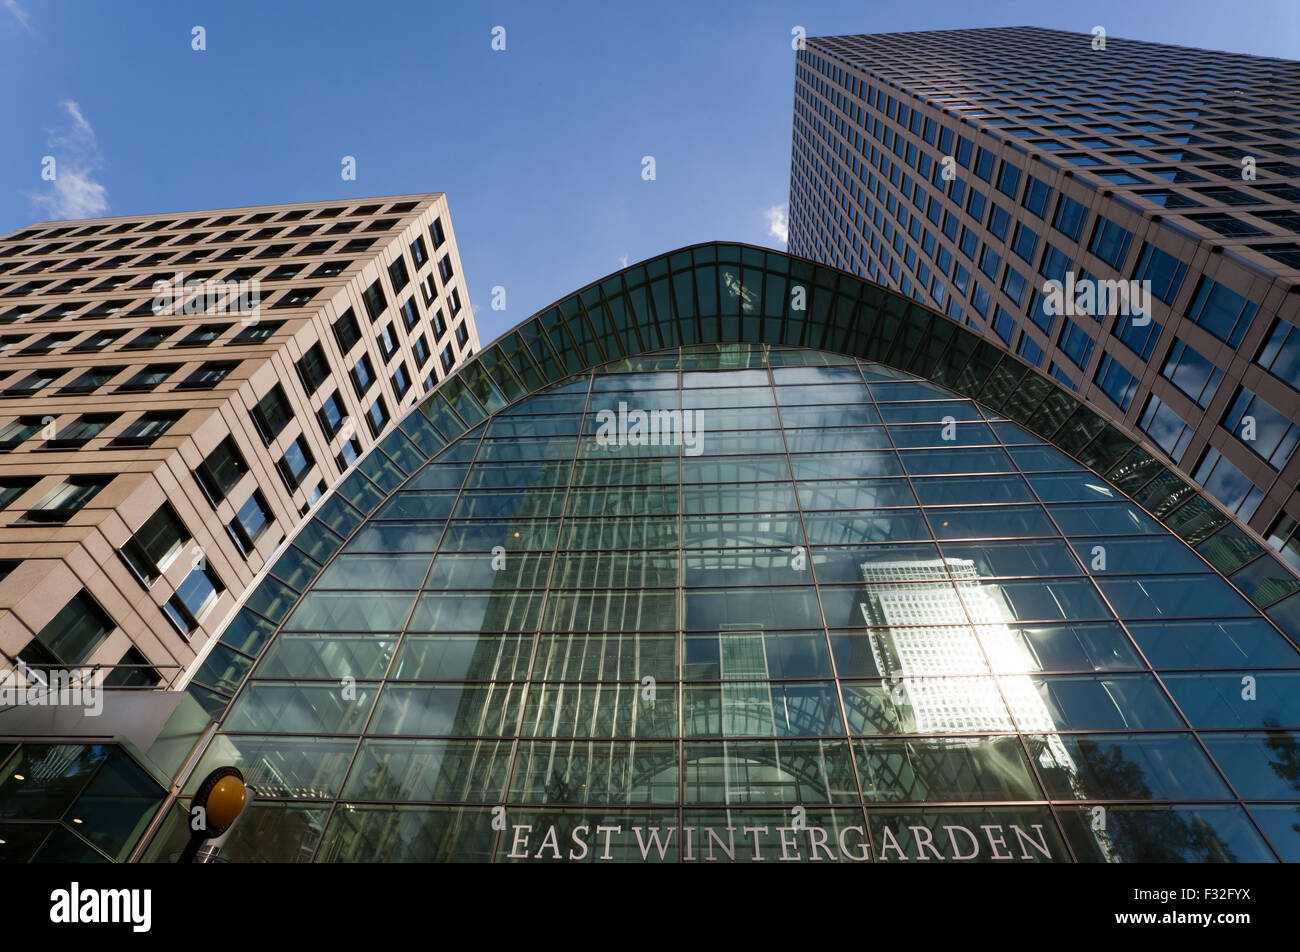 Wide-Angle view looking up at the front of the East Wintergarden, 43 Bank Street, Canary Wharf, London. Stock Photo